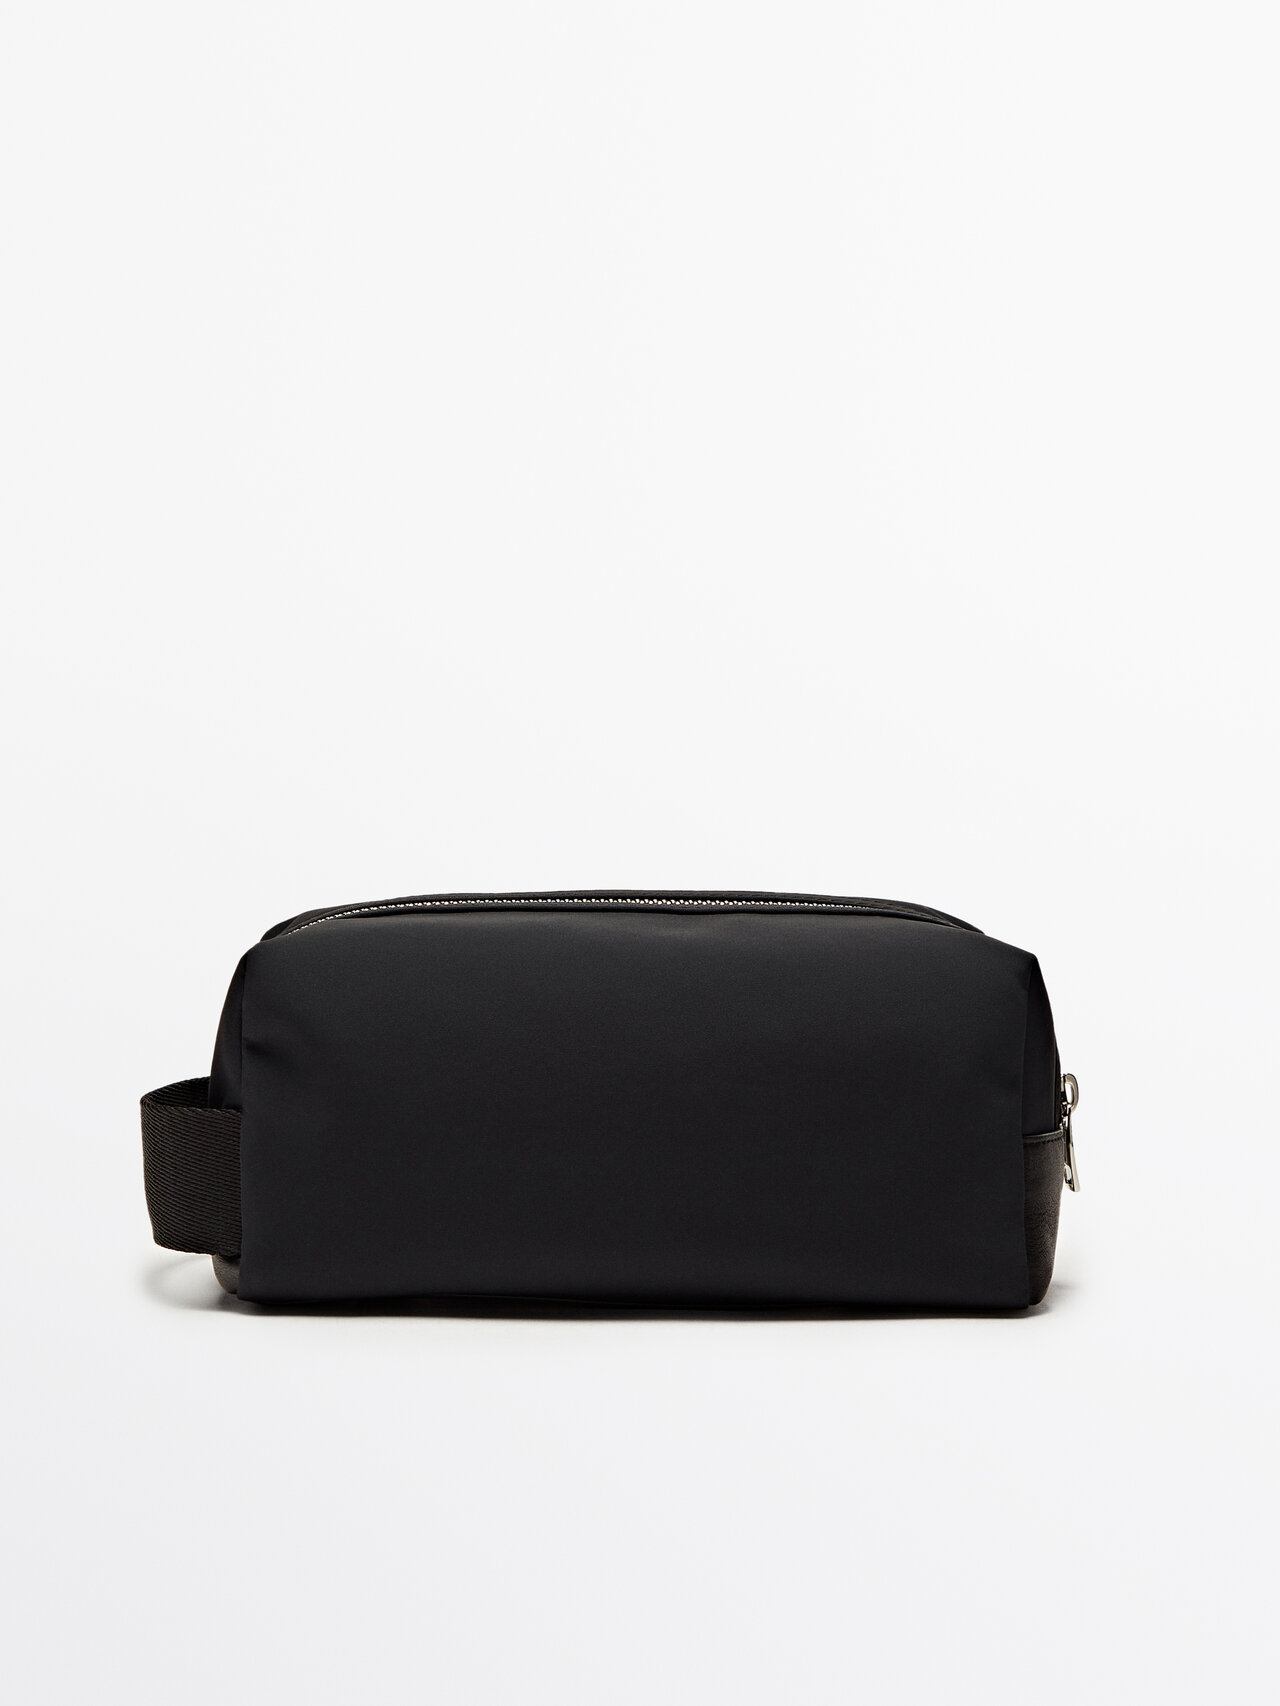 Massimo Dutti Toiletry Bag With Leather Trims In Black